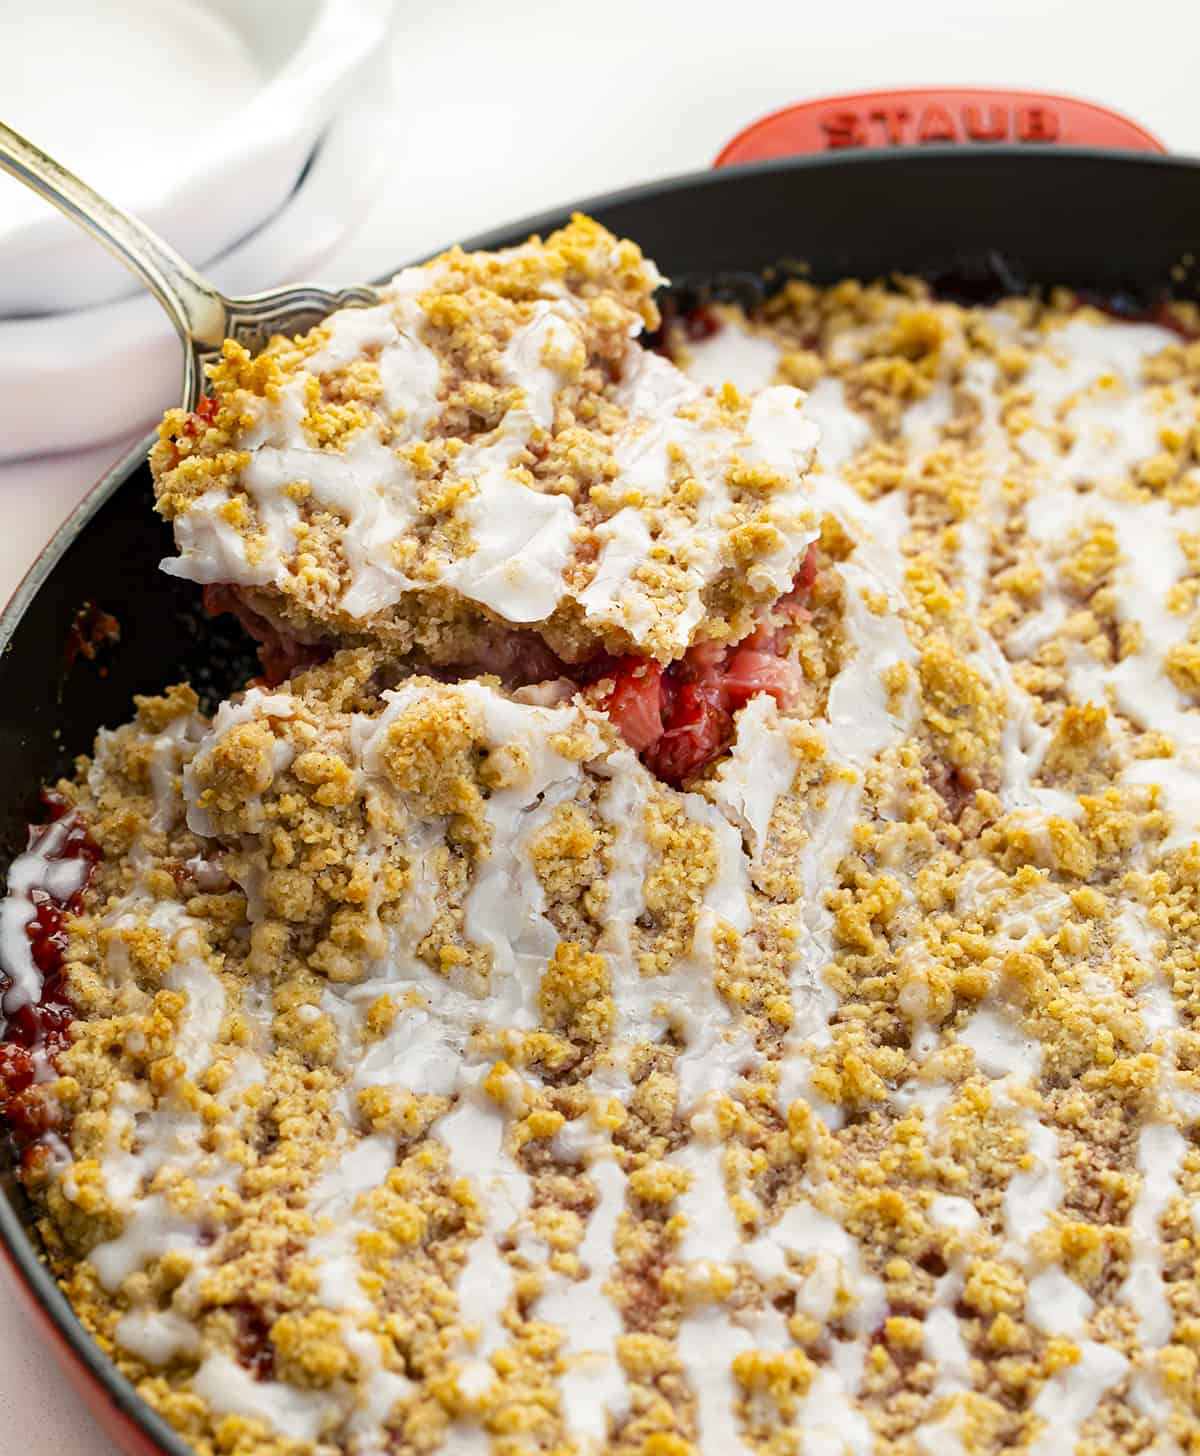 Scooping a Slice of Skillet Strawberry Crumble